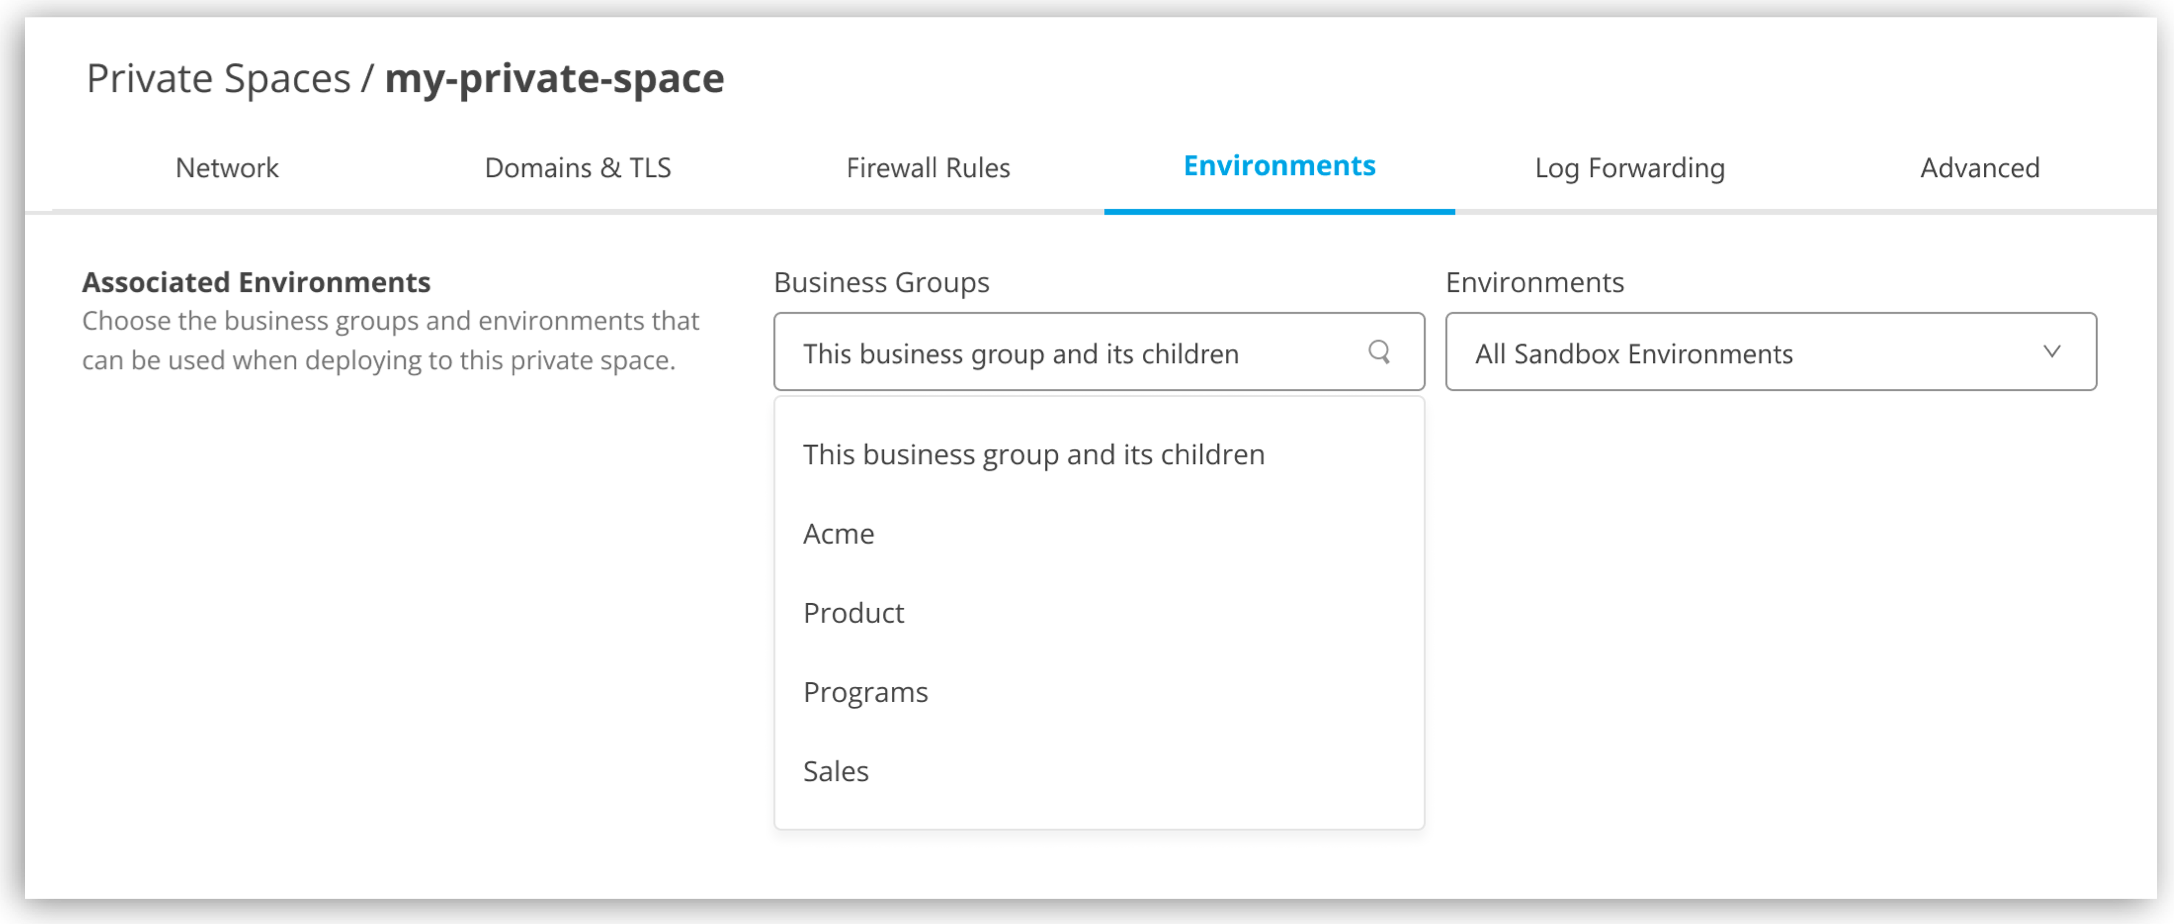 Select the business group from the drop-down list.